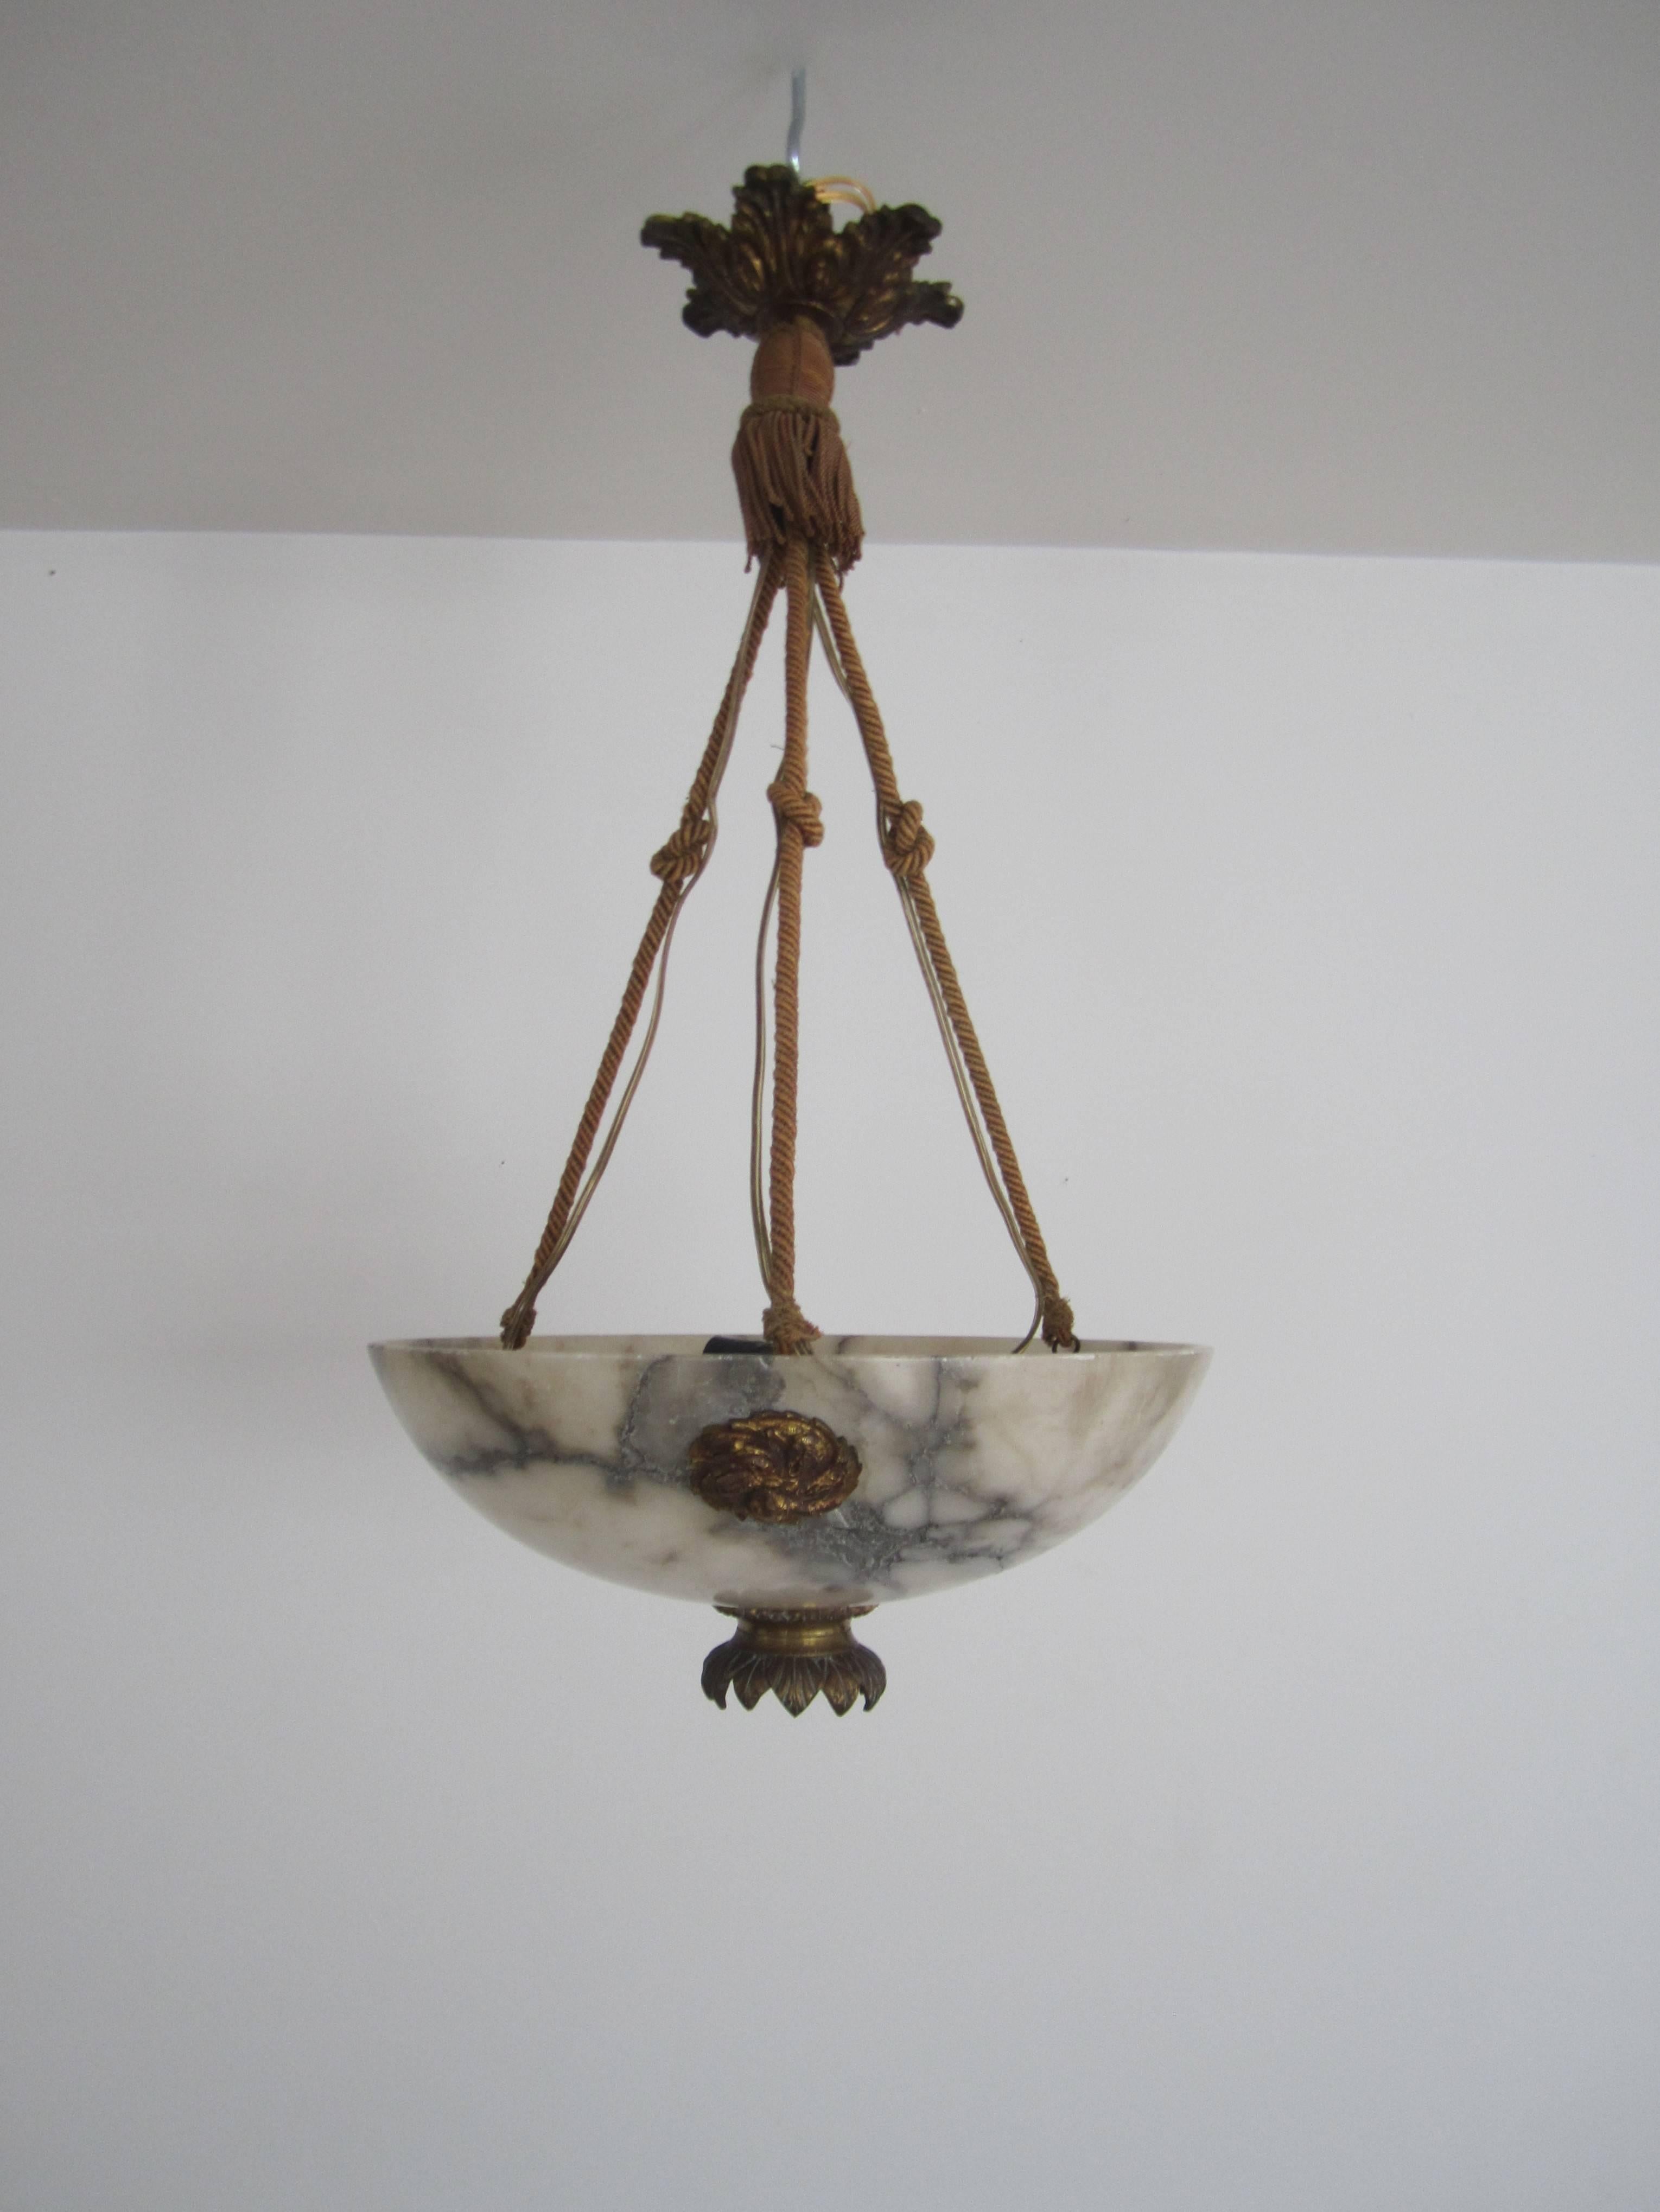 A stunning Mid-20th century French four-light alabaster marble and brass chandelier. Chandelier has a beautiful brass lotus flower detail at bottom of shade allows light to flow down (close-up see image #4.) There are three decorative gold gilt